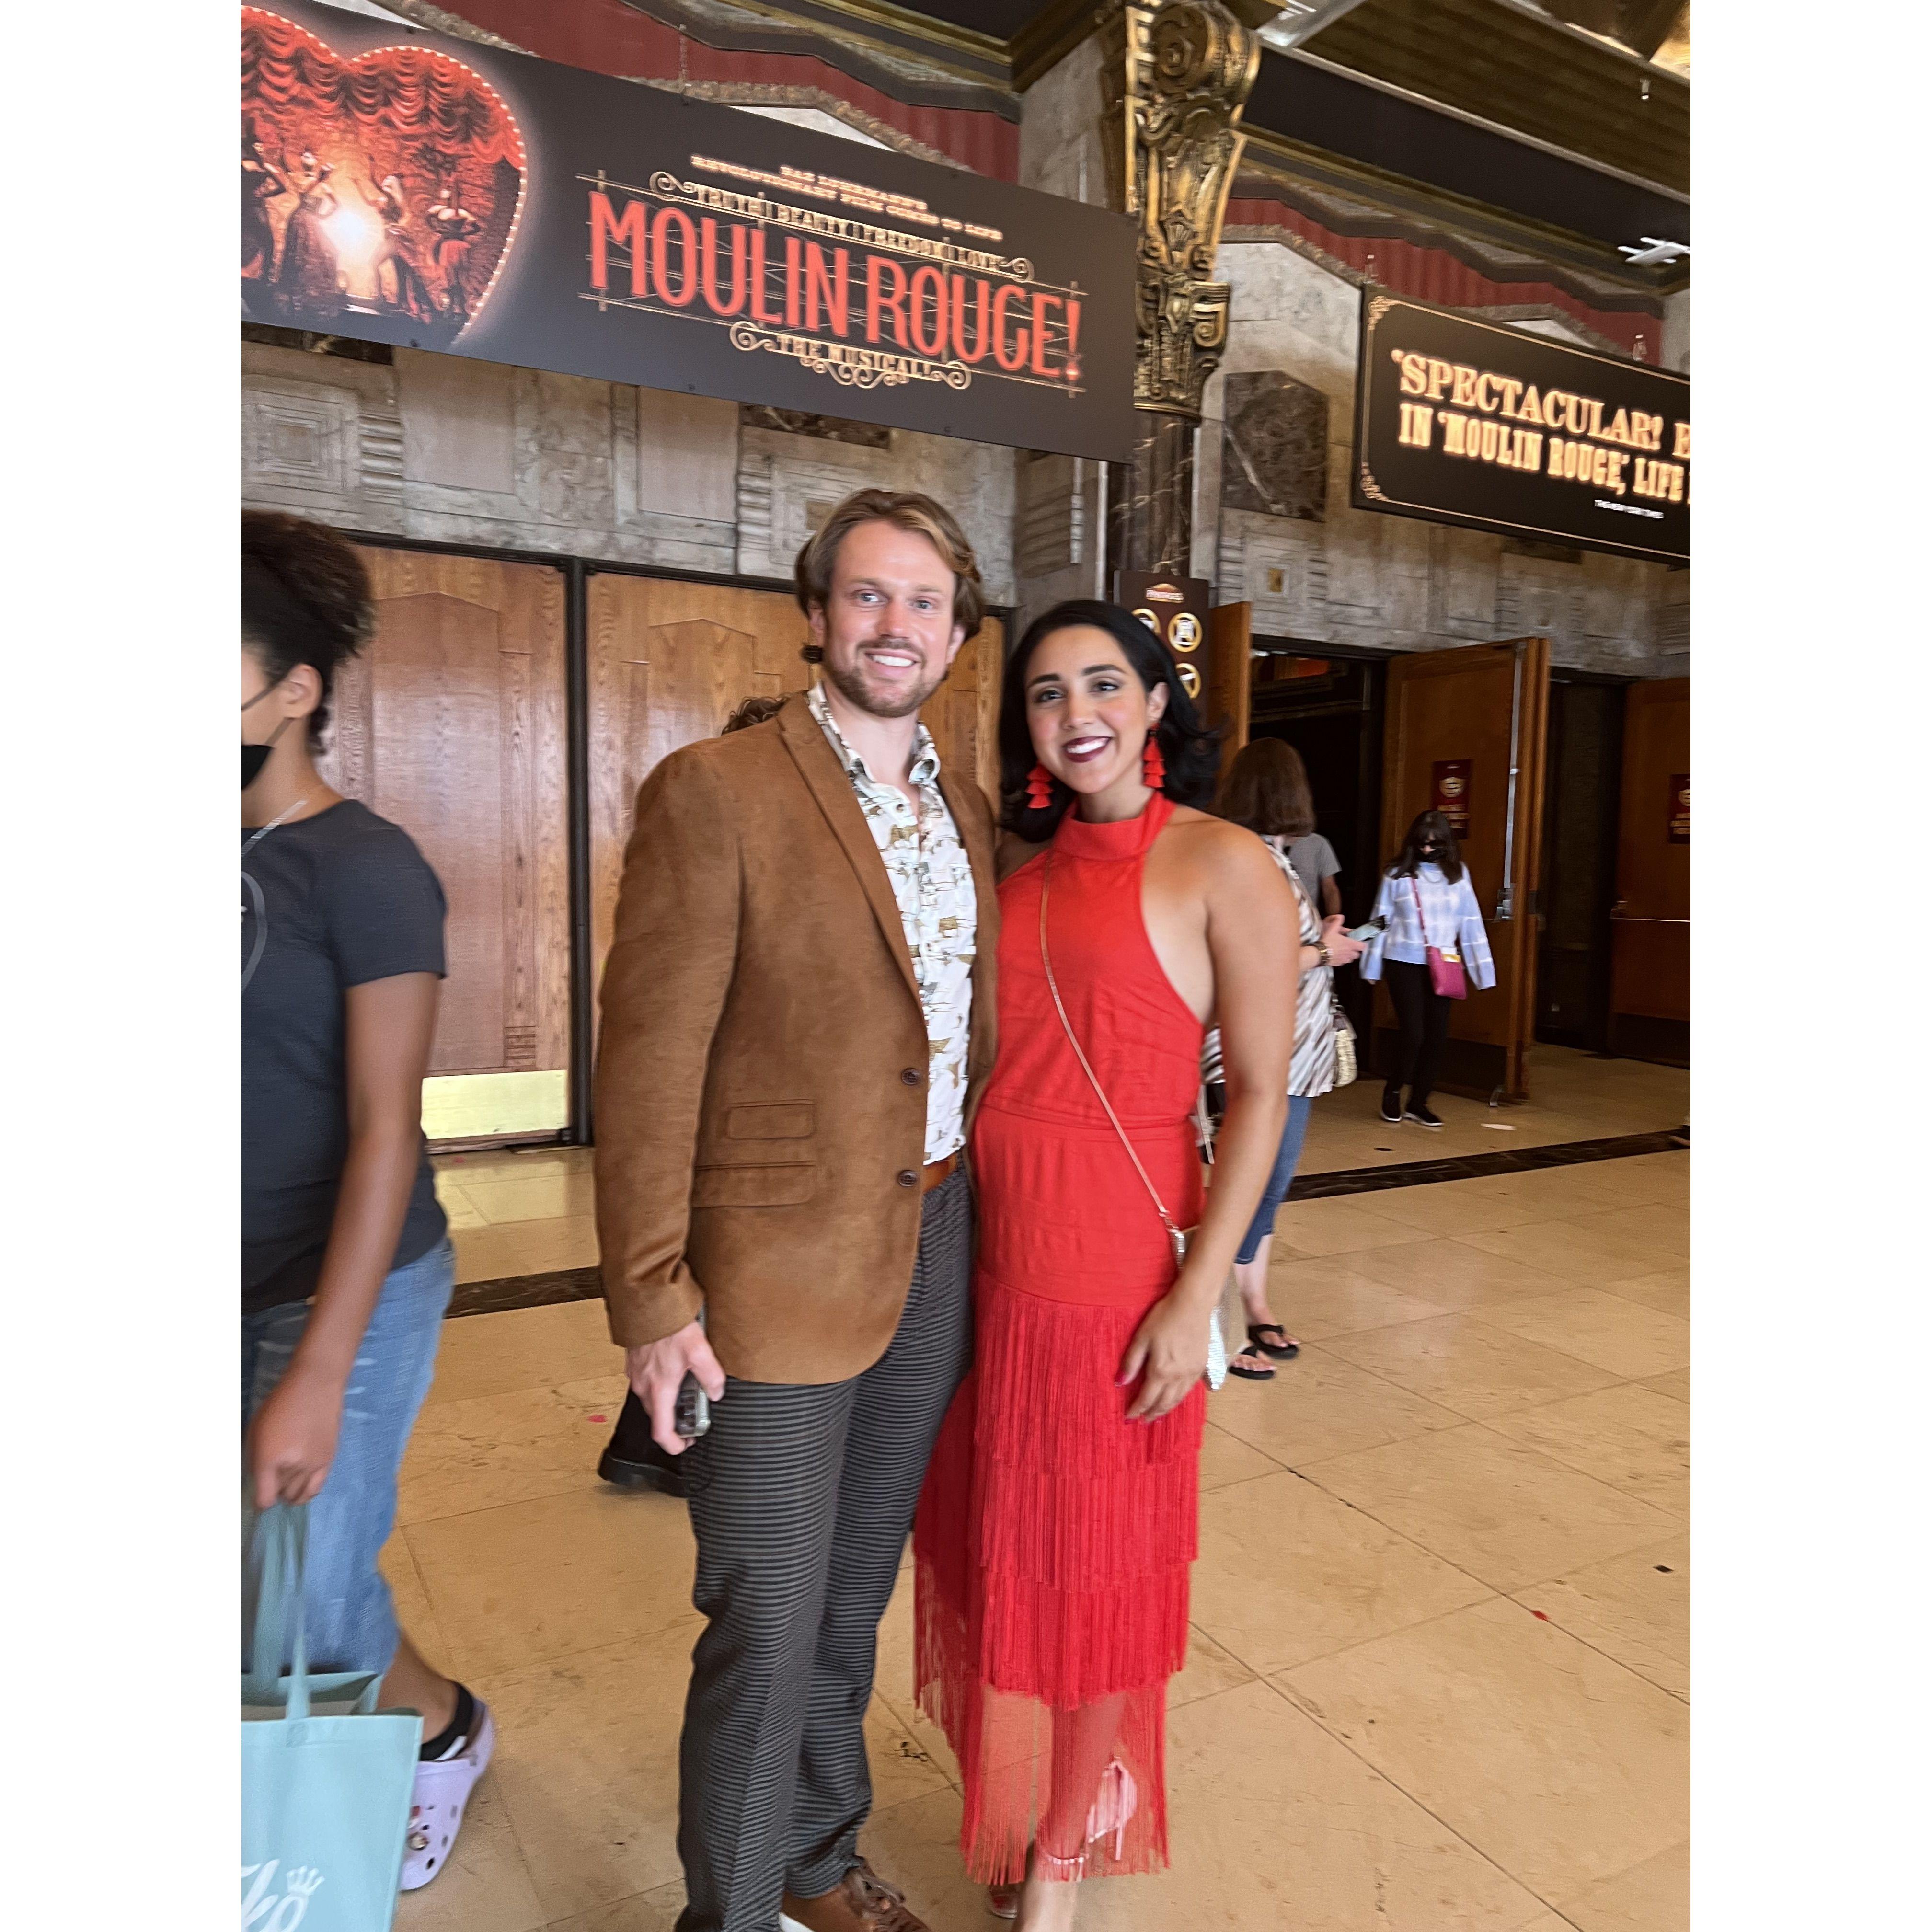 Celebrating Nay's birthday at the Pantages...We didn't know that we would fall in love with someone who appreciates live theatre as much as we each do. August 2022.